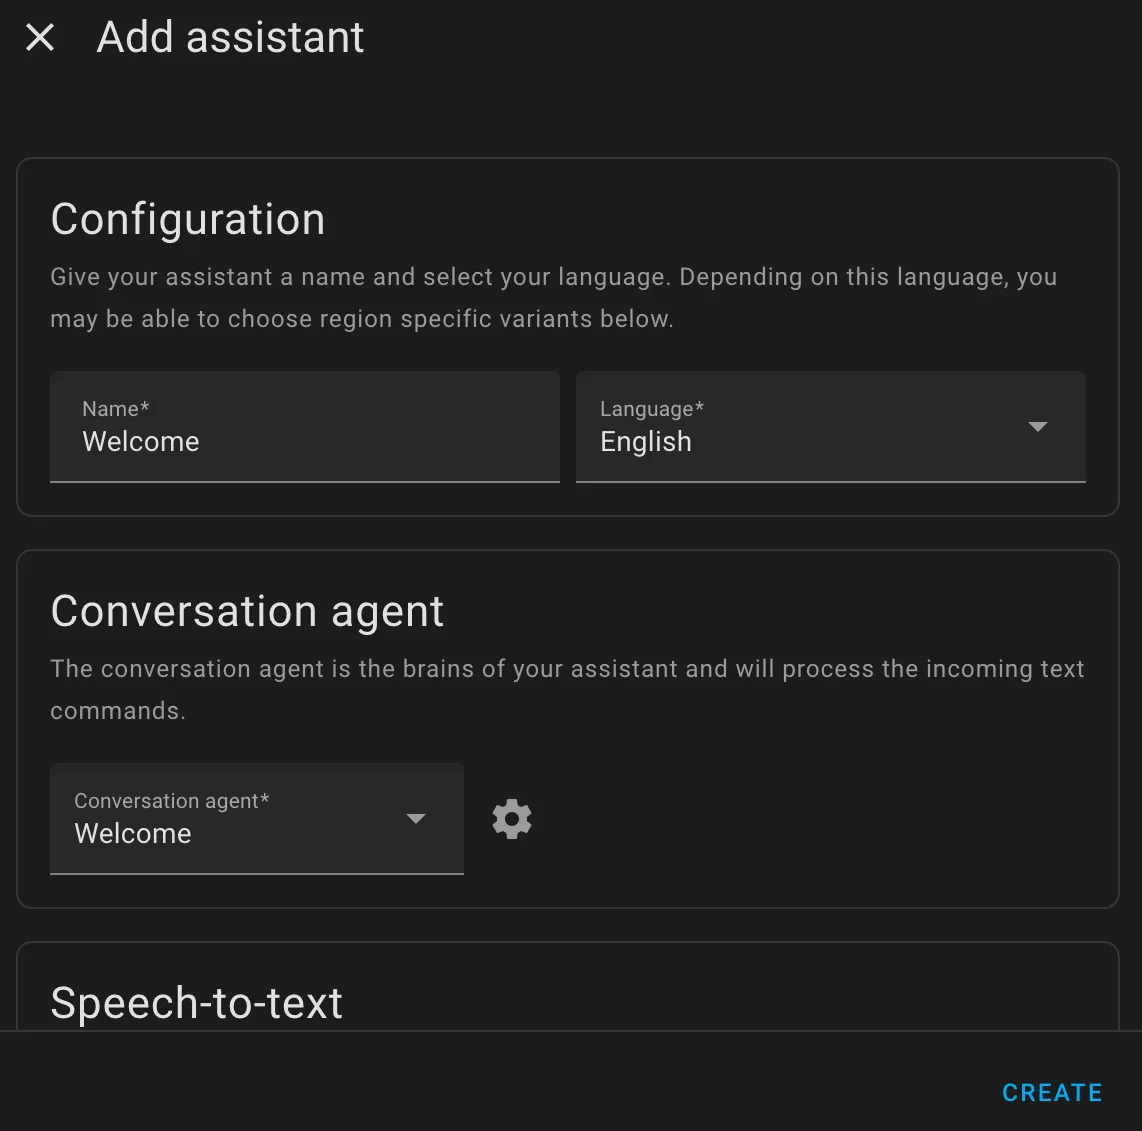 Screenshot of the "Add assistant" modal